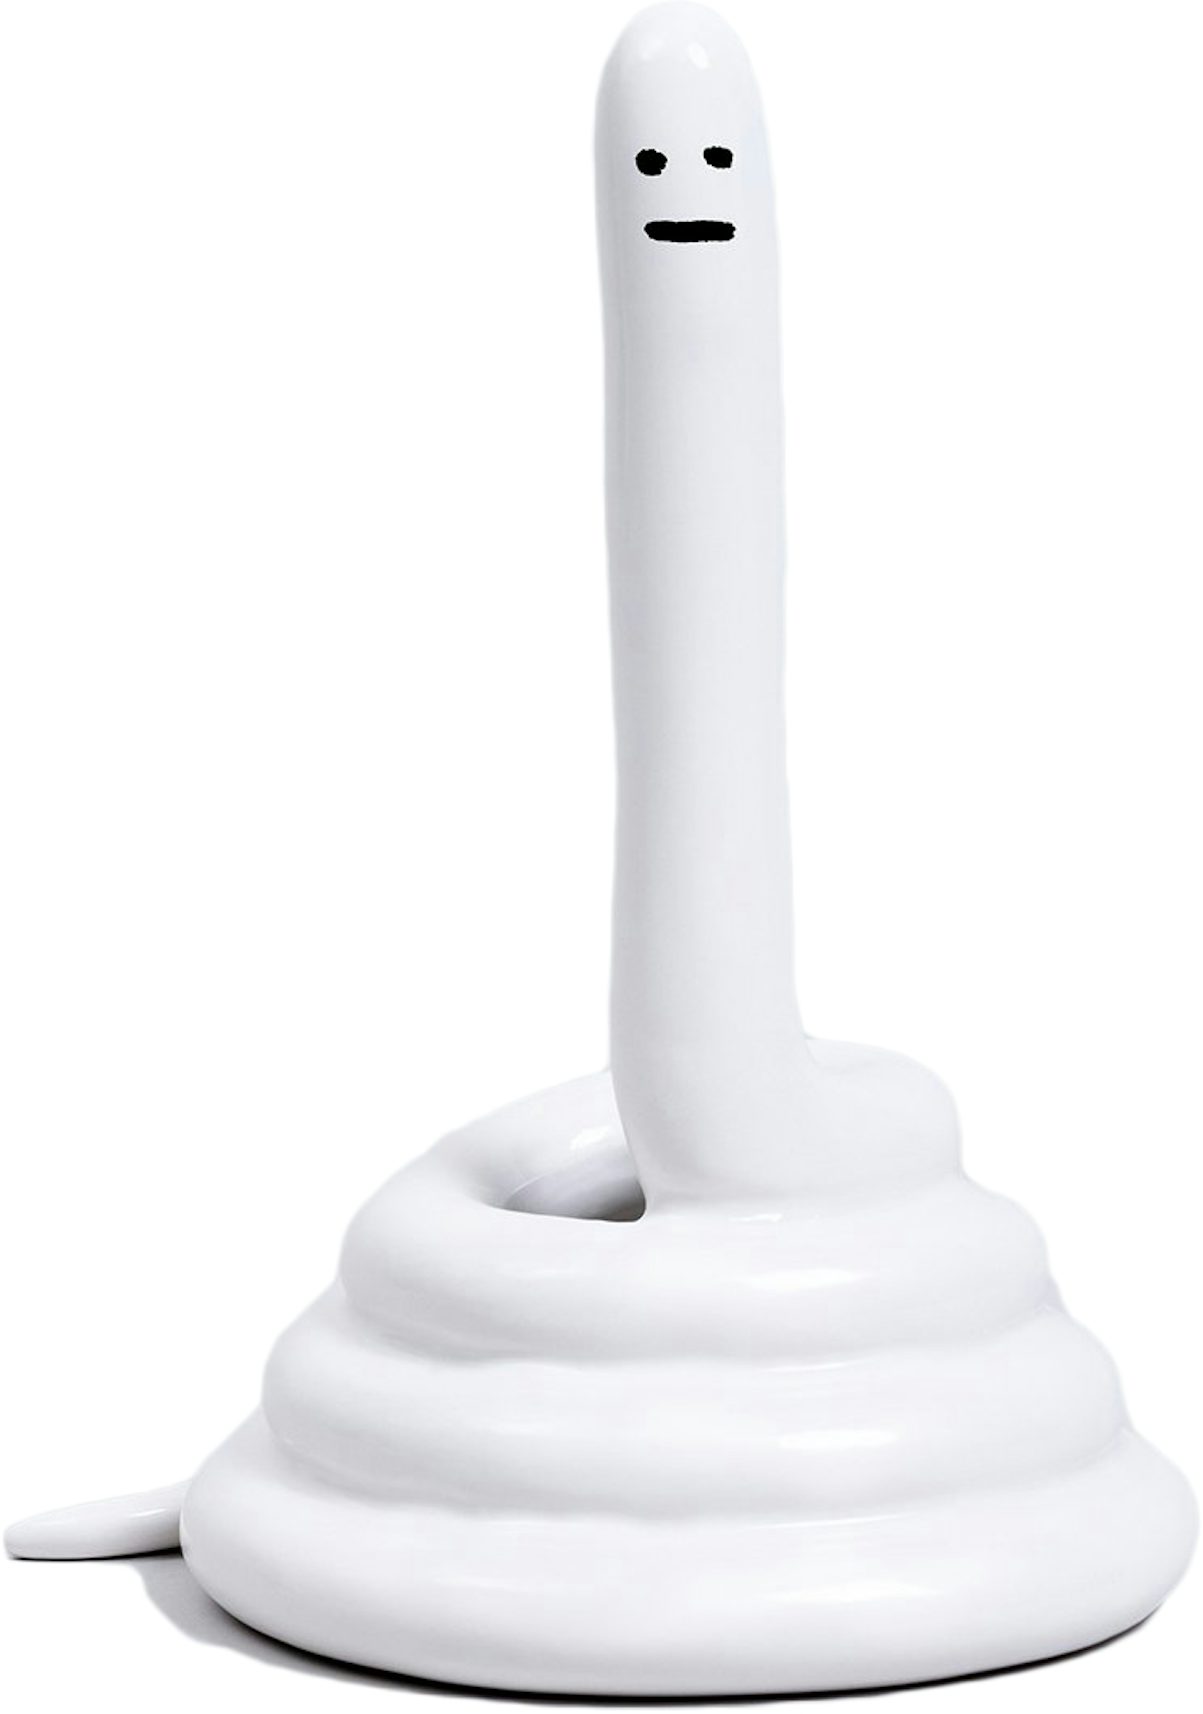 Louis Vuitton Logo Plunger - Where Can I Find? 